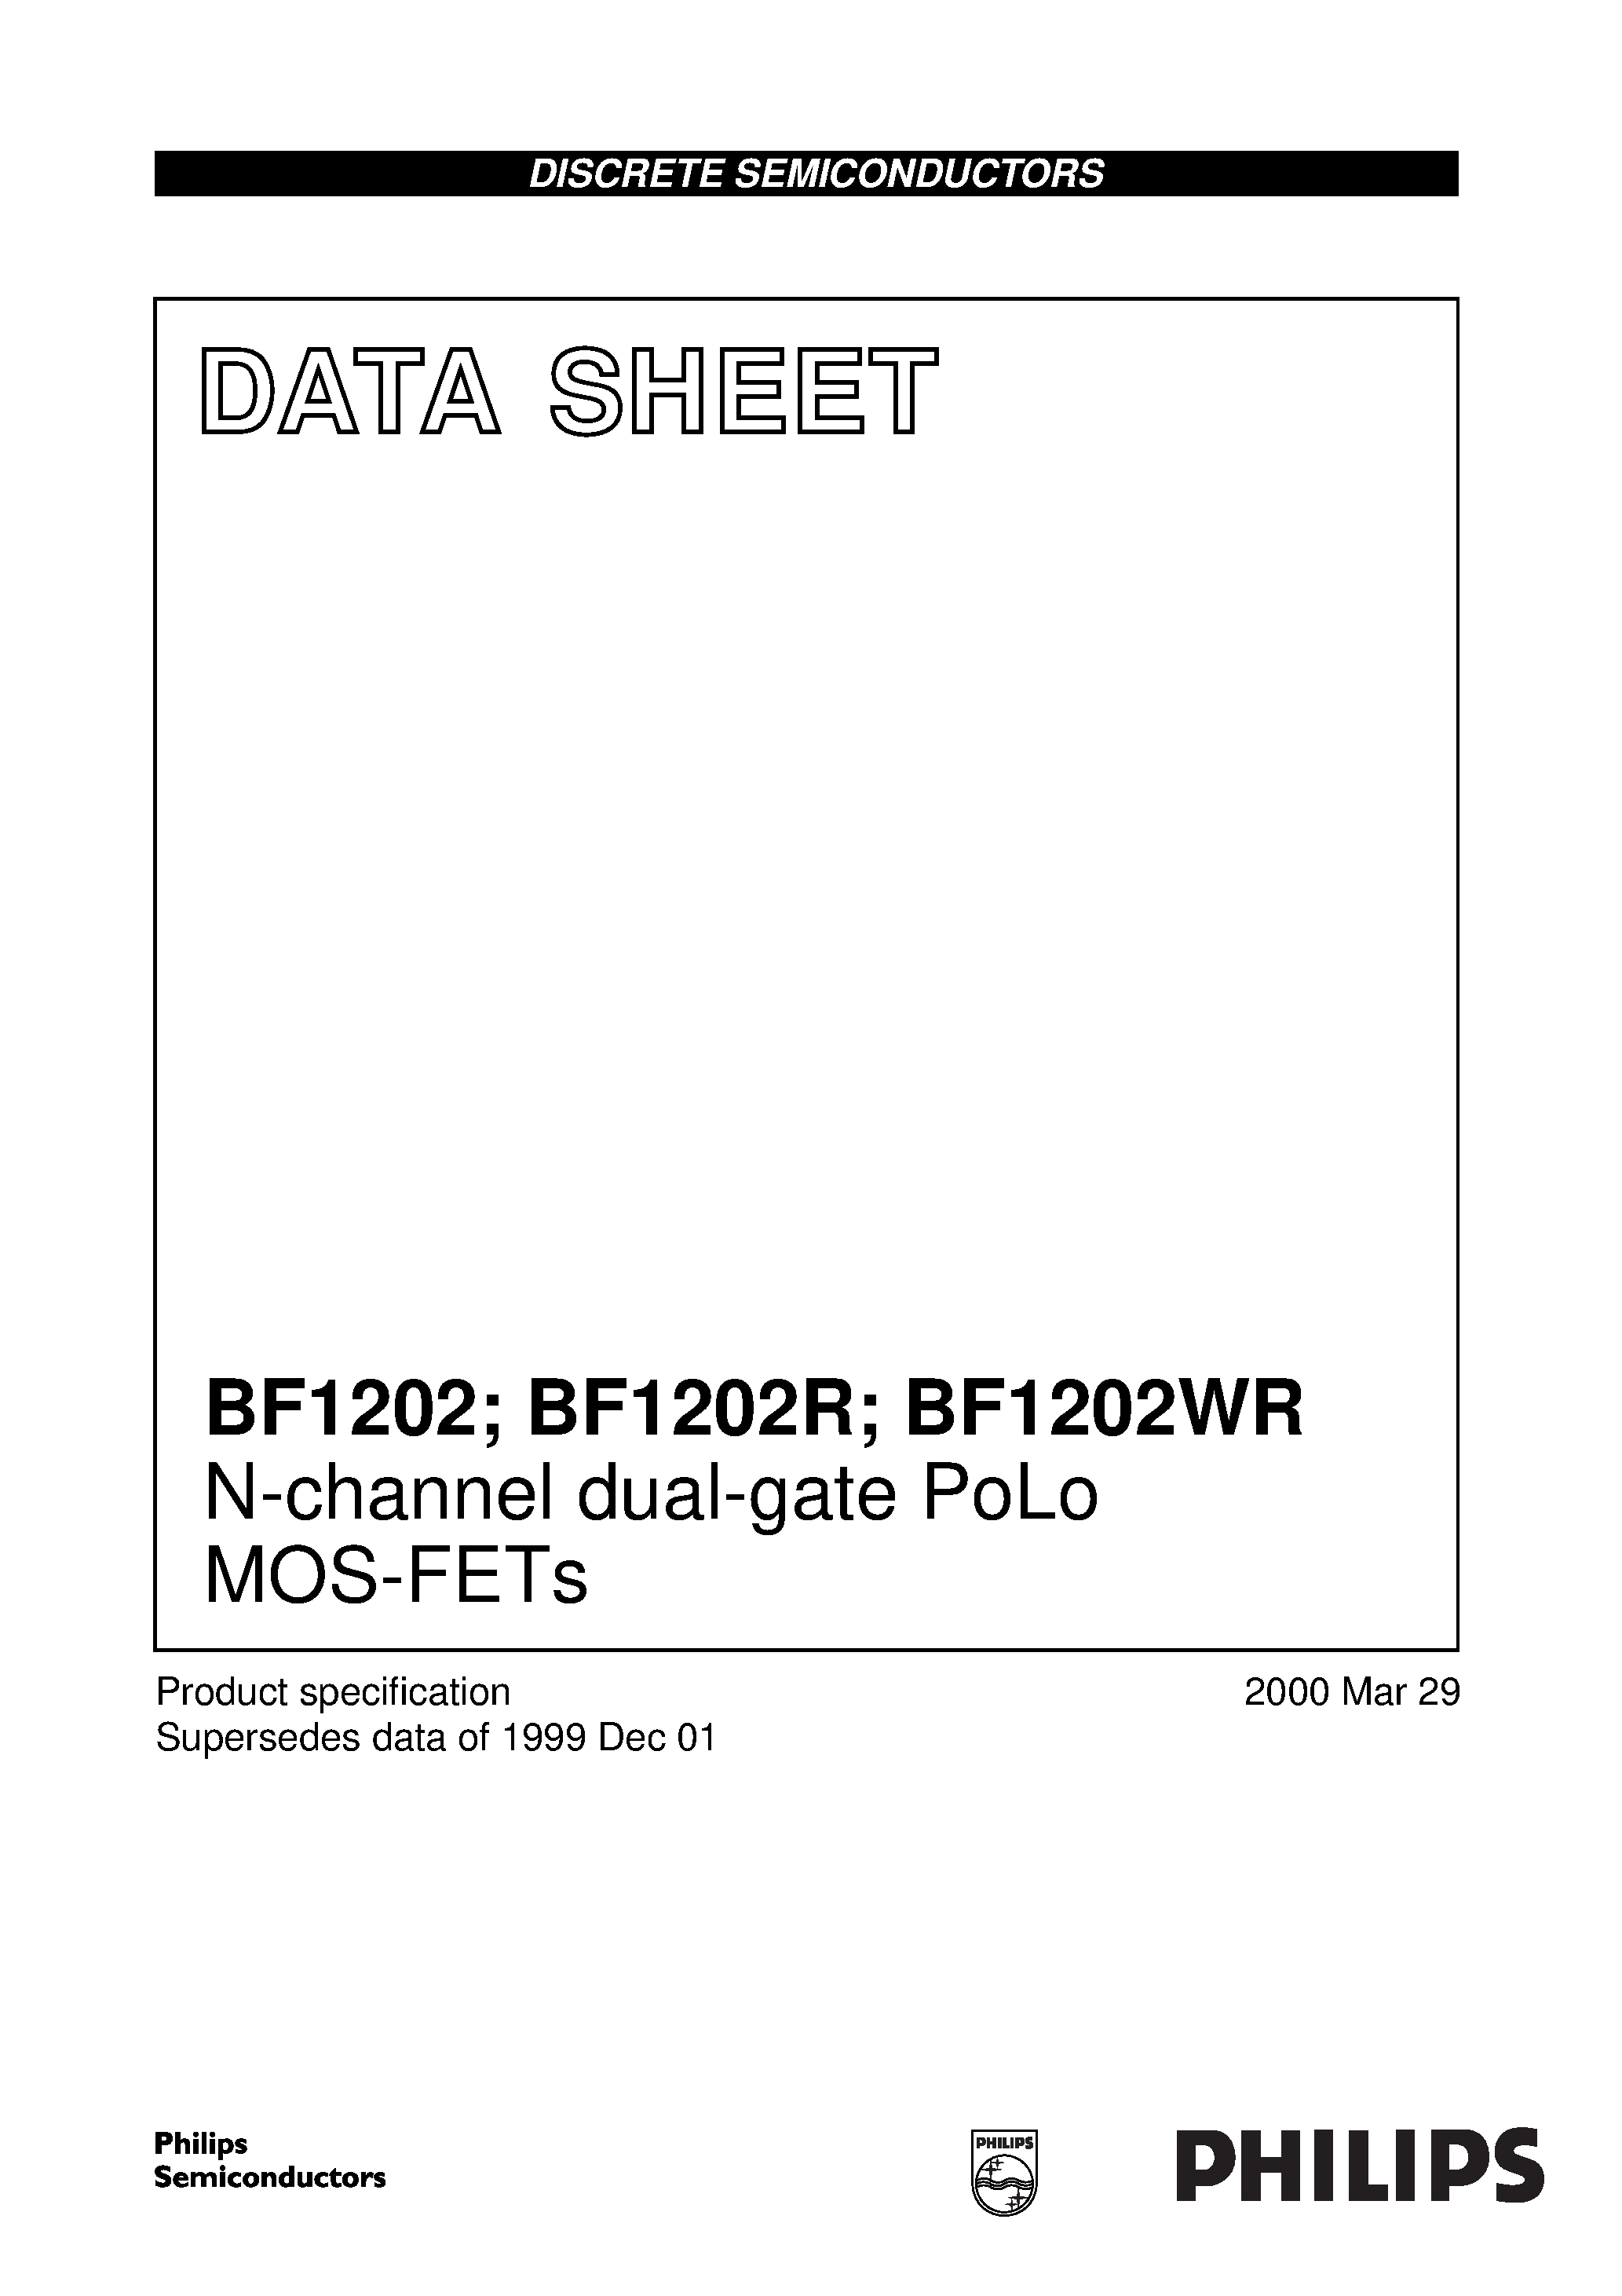 Datasheet BF1202 - N-channel dual-gate PoLo MOS-FETs page 1